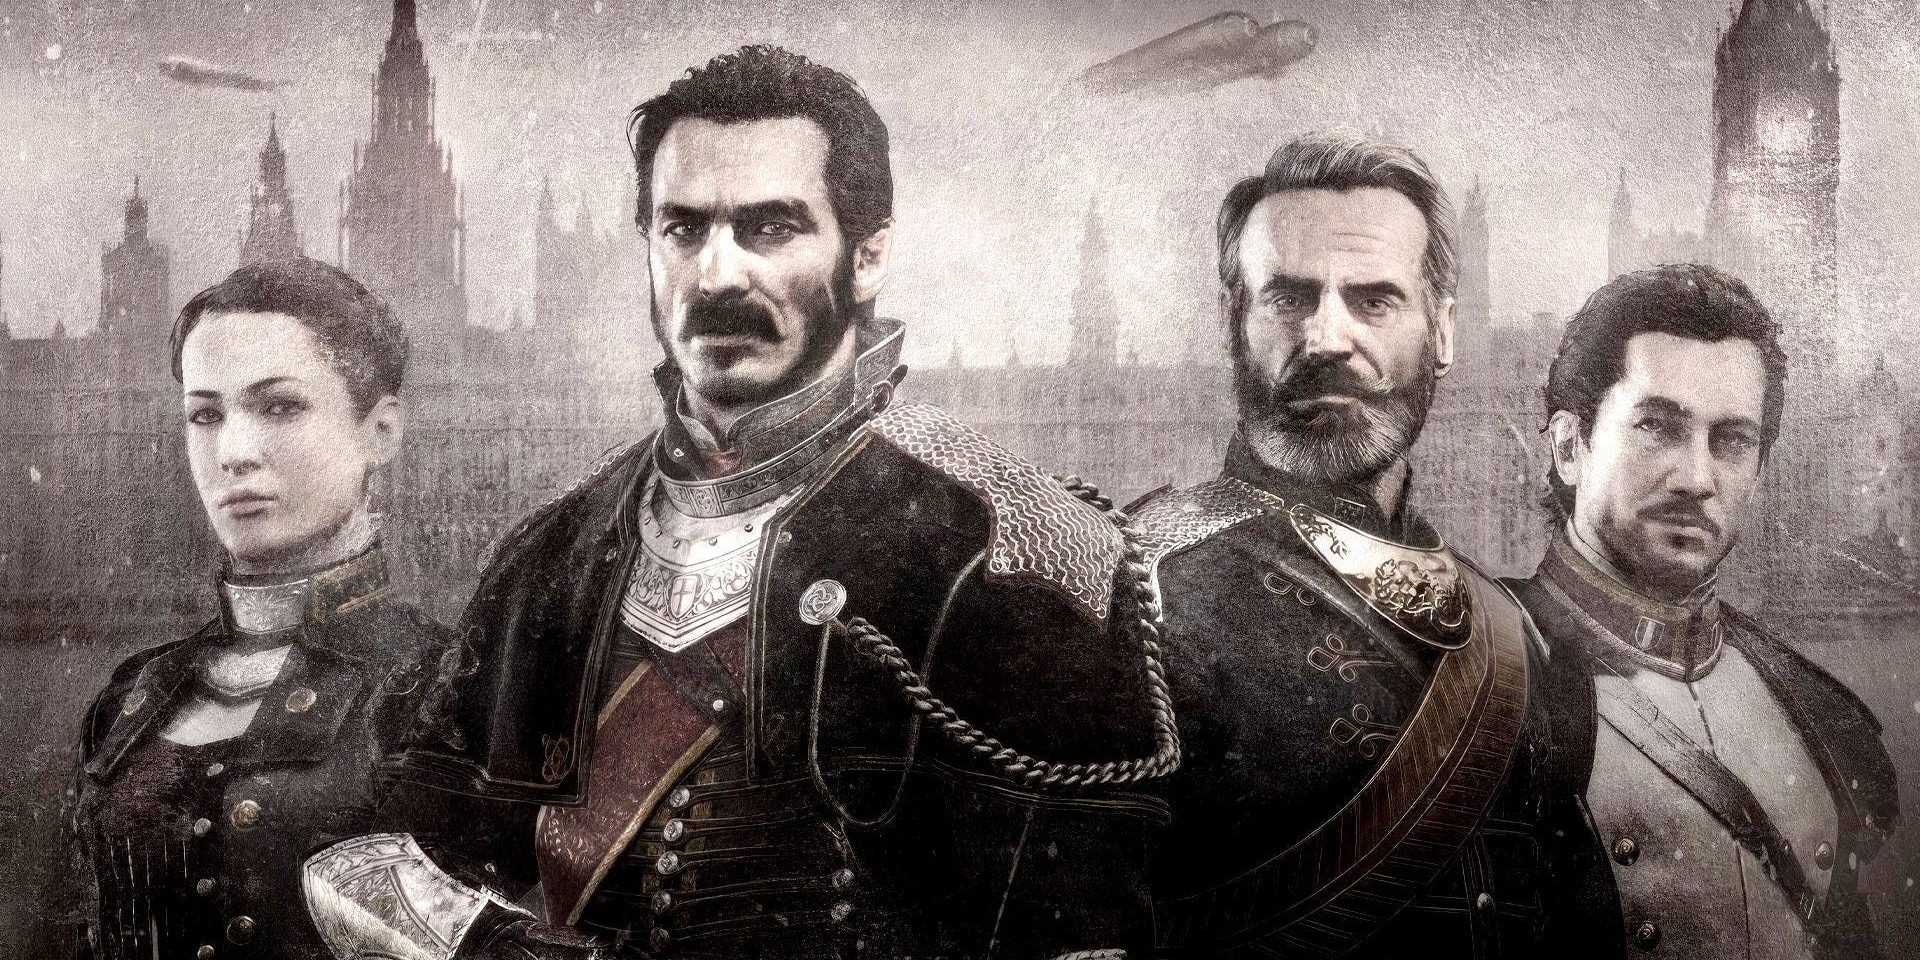 The Order: 1886 pushed visuals hard in 2015 - and still looks stunning today